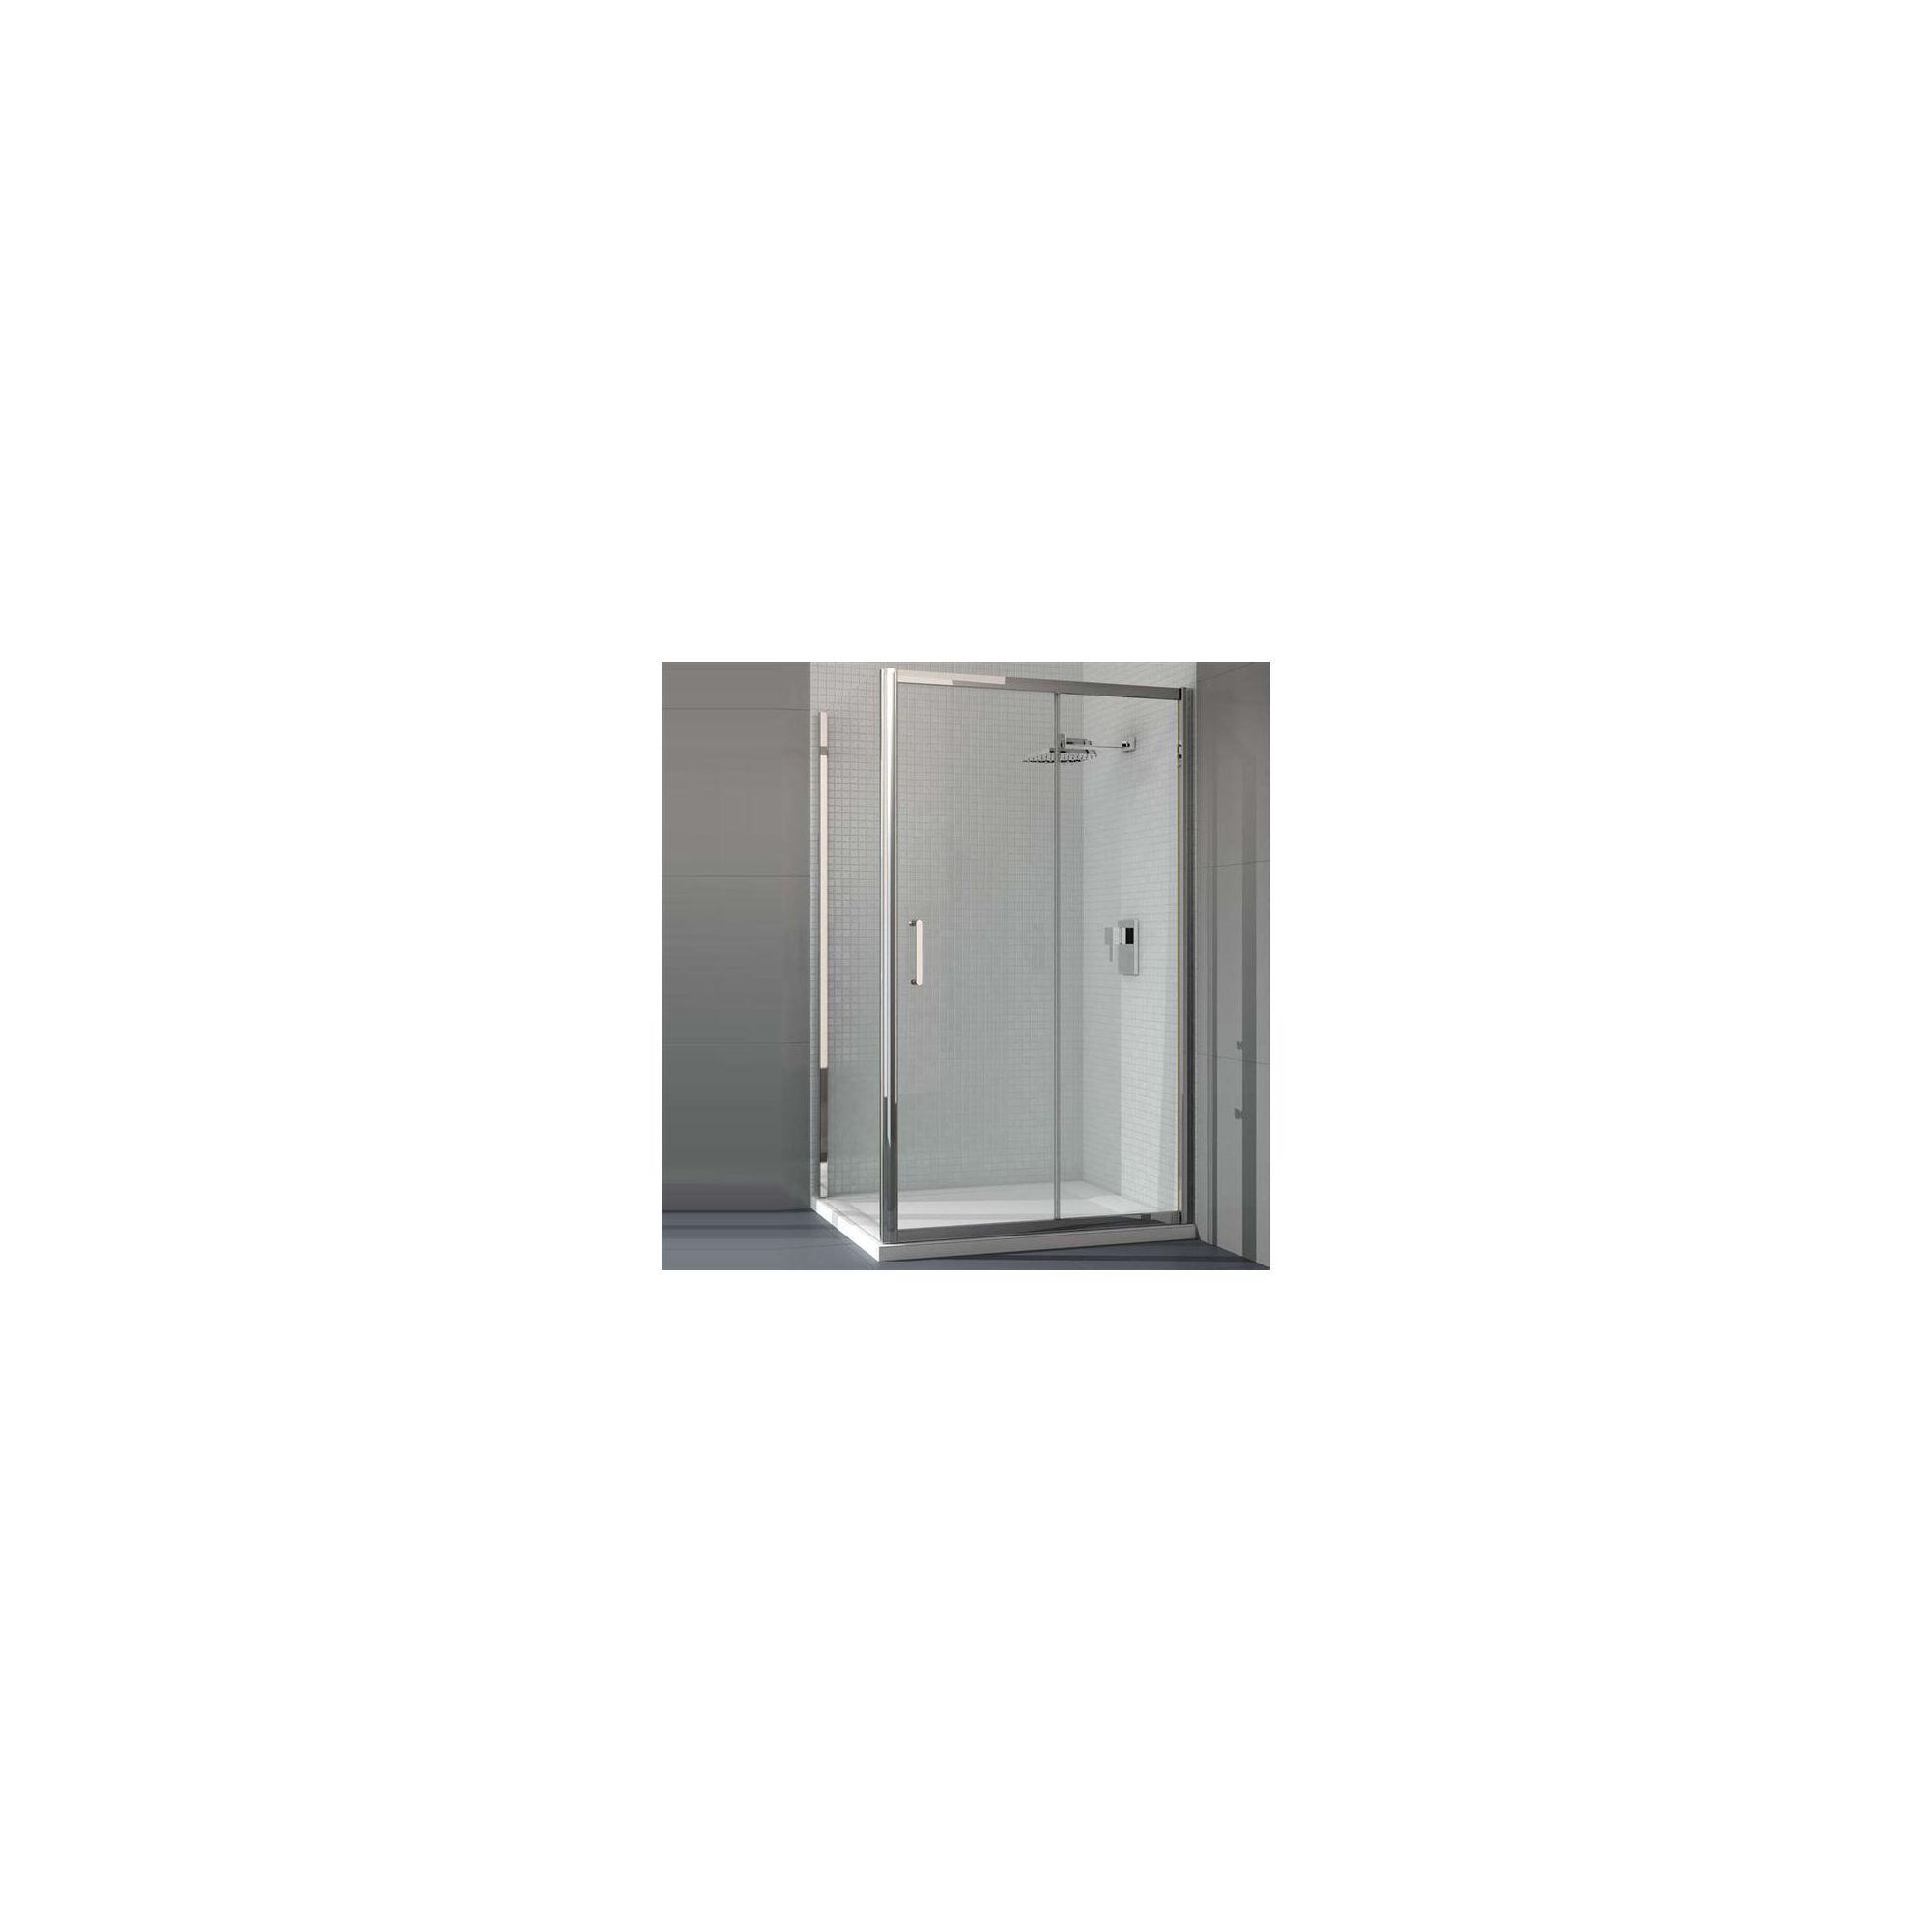 Merlyn Vivid Six Sliding Door Shower Enclosure, 1200mm x 900mm, Low Profile Tray, 6mm Glass at Tesco Direct